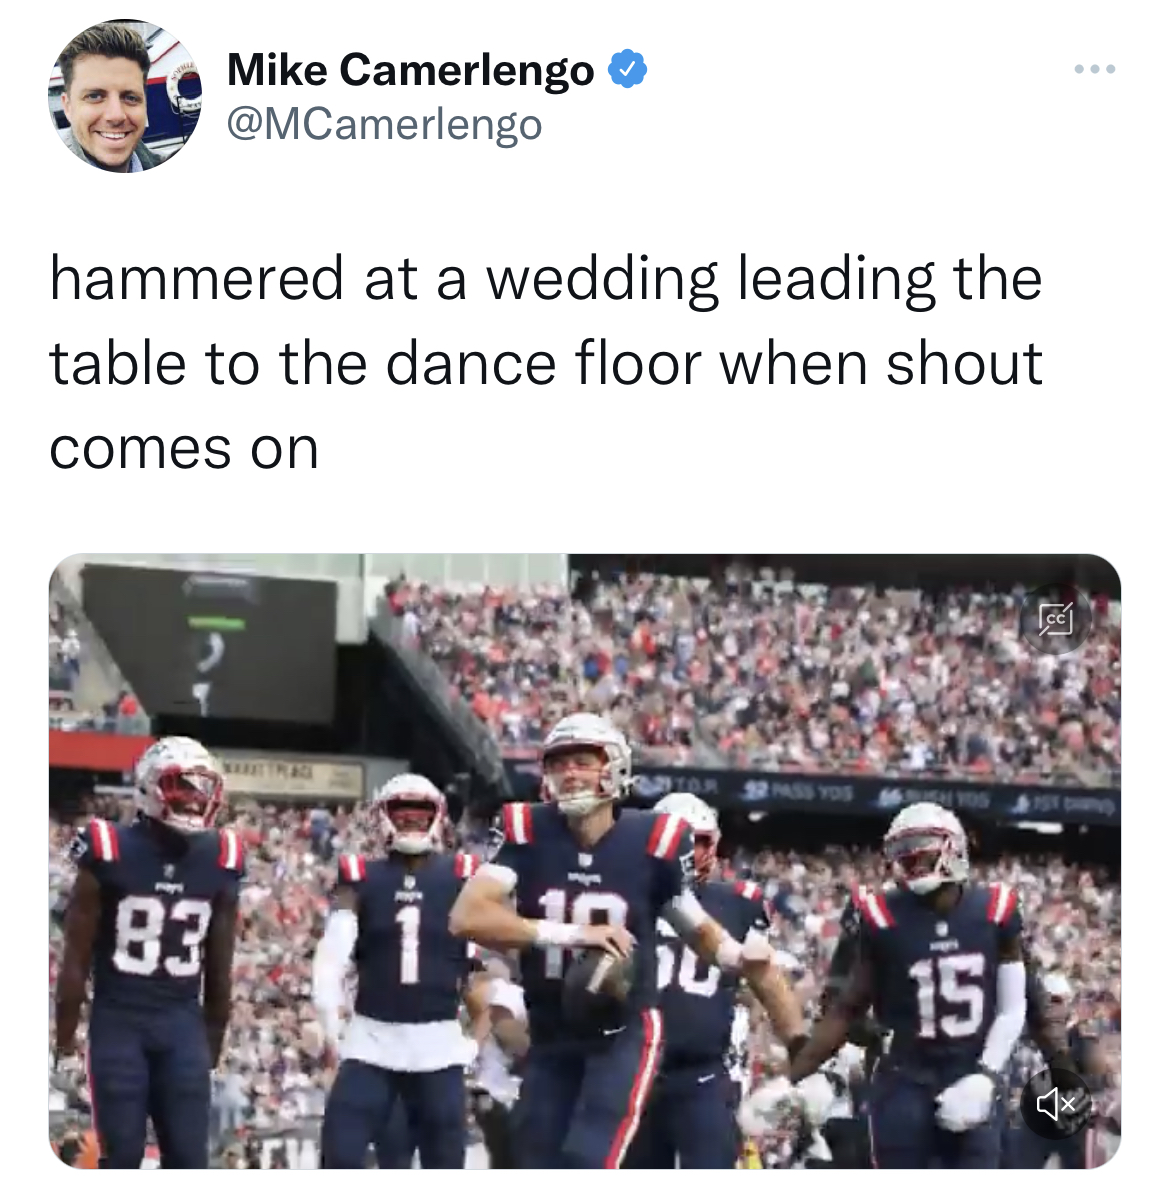 nfl football tweets week 3 - team - Mike Camerlengo hammered at a wedding leading the table to the dance floor when shout comes on 83 15 ...